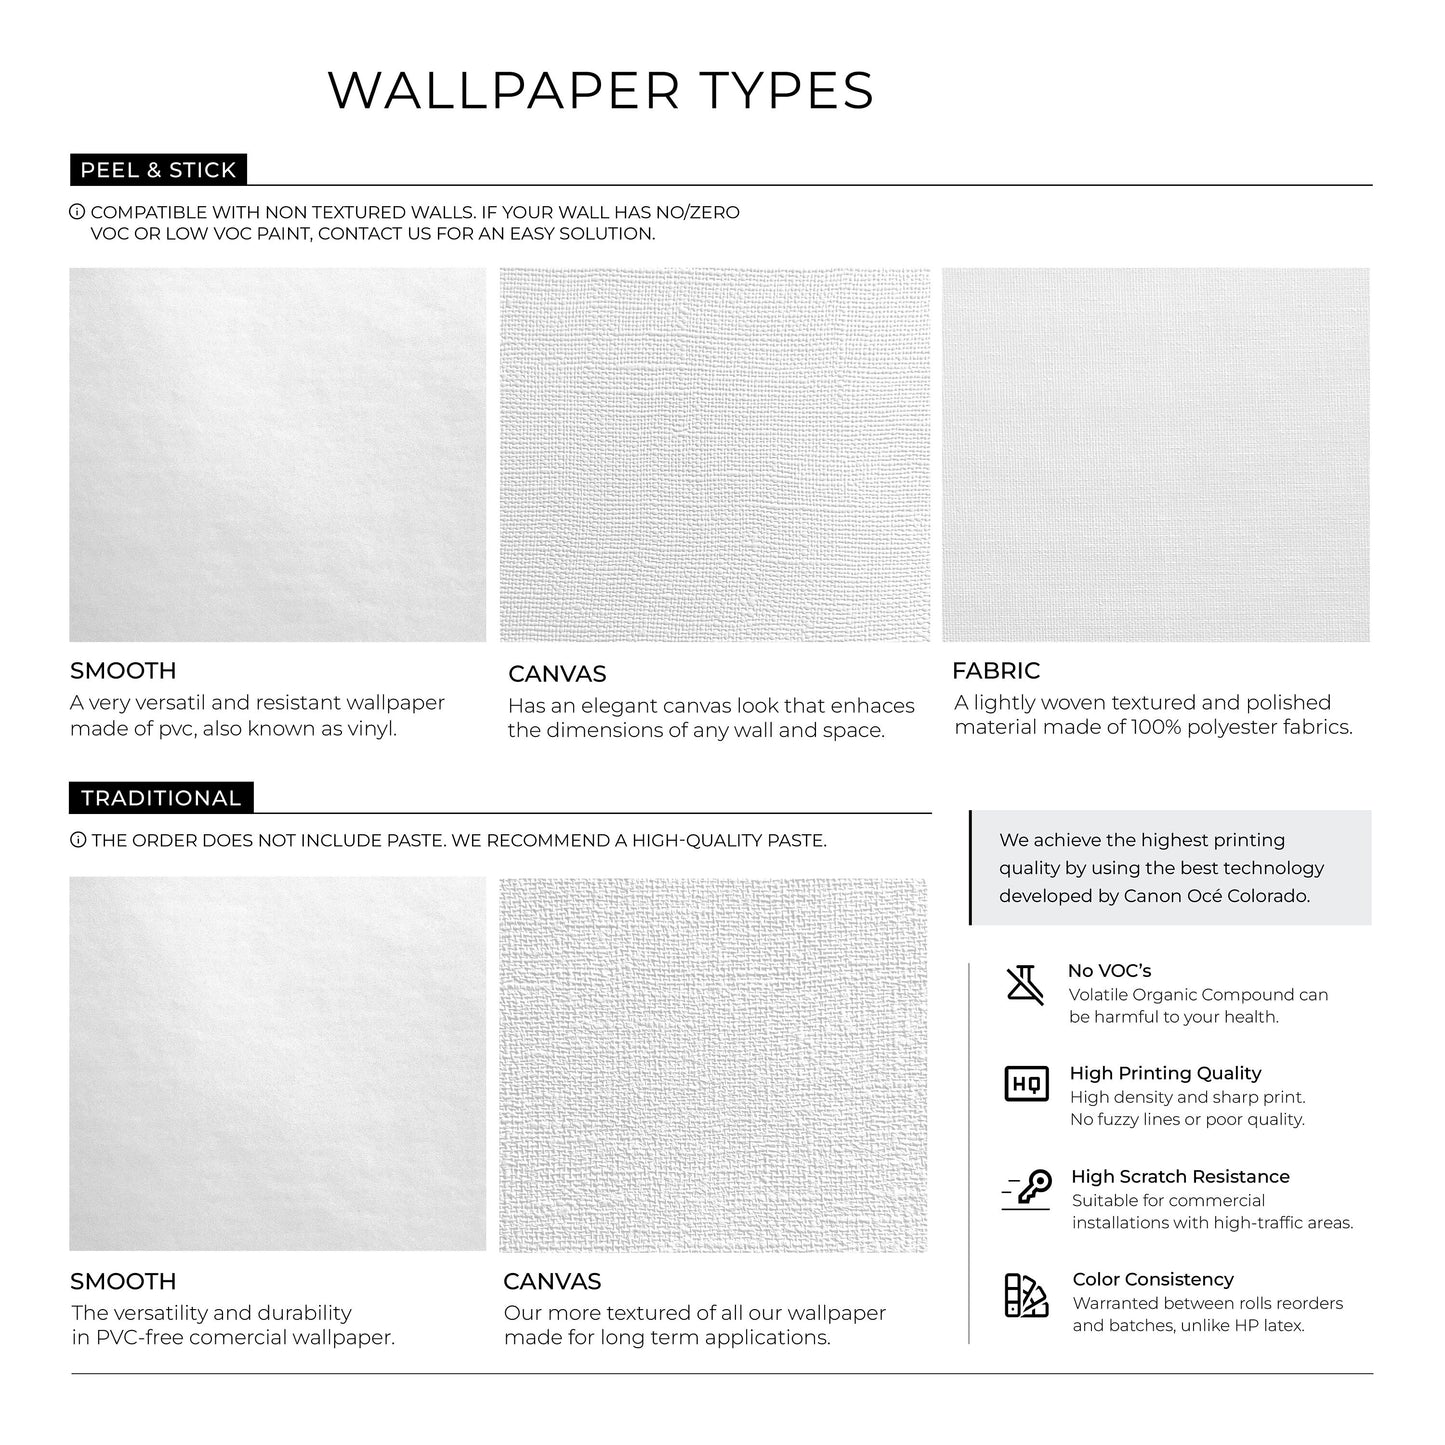 Removable Wallpaper Peel and Stick Wallpaper Wall Paper Wall Mural - Geometric Wallpaper - A721